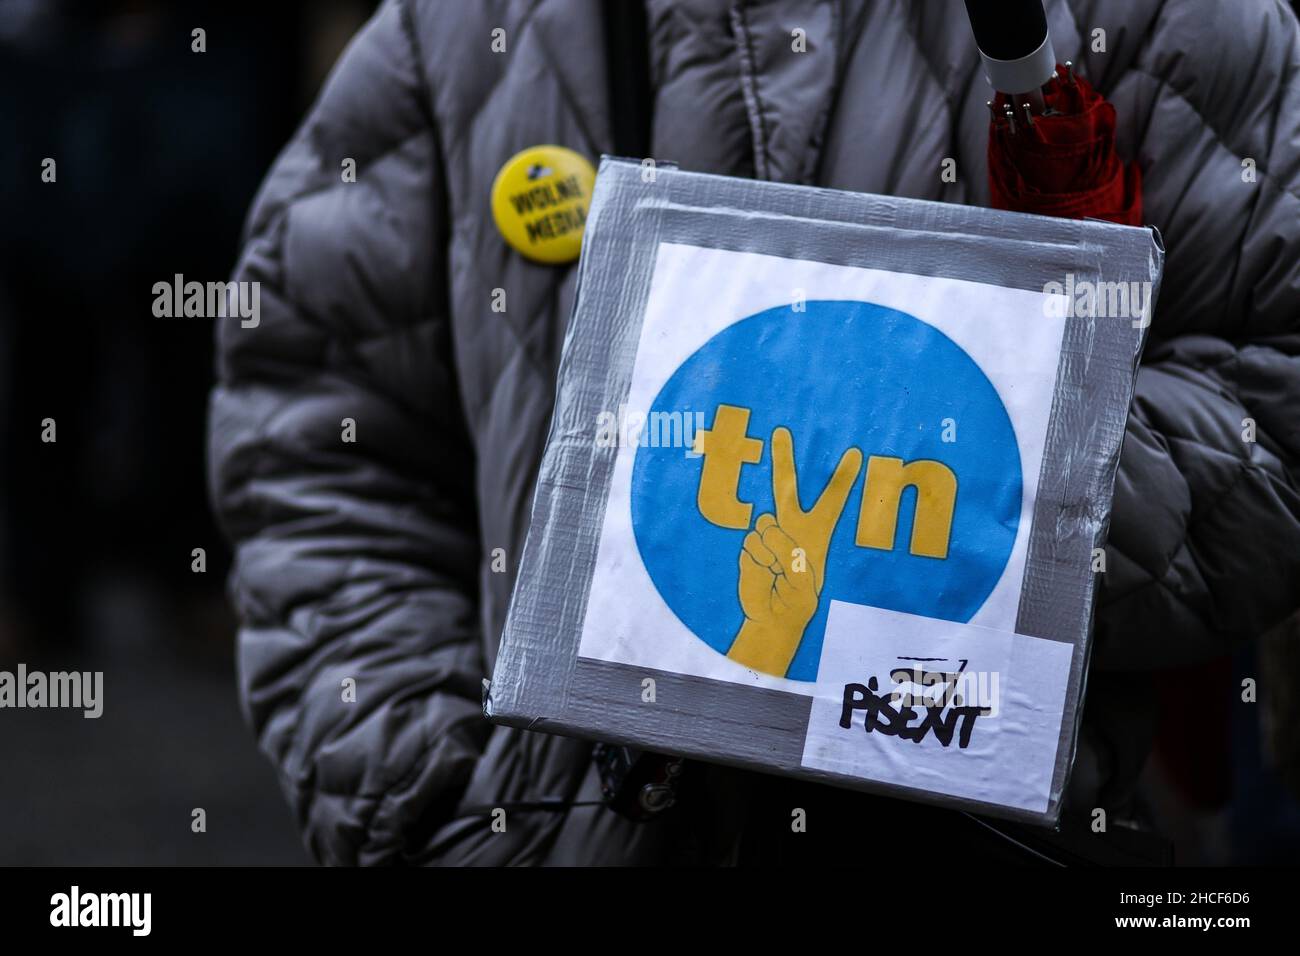 A banner with a logo of TVN broadcasting company and a 'victory' gesture is seen on a protester's coat.  Poland's parliament recently passed a controv Stock Photo